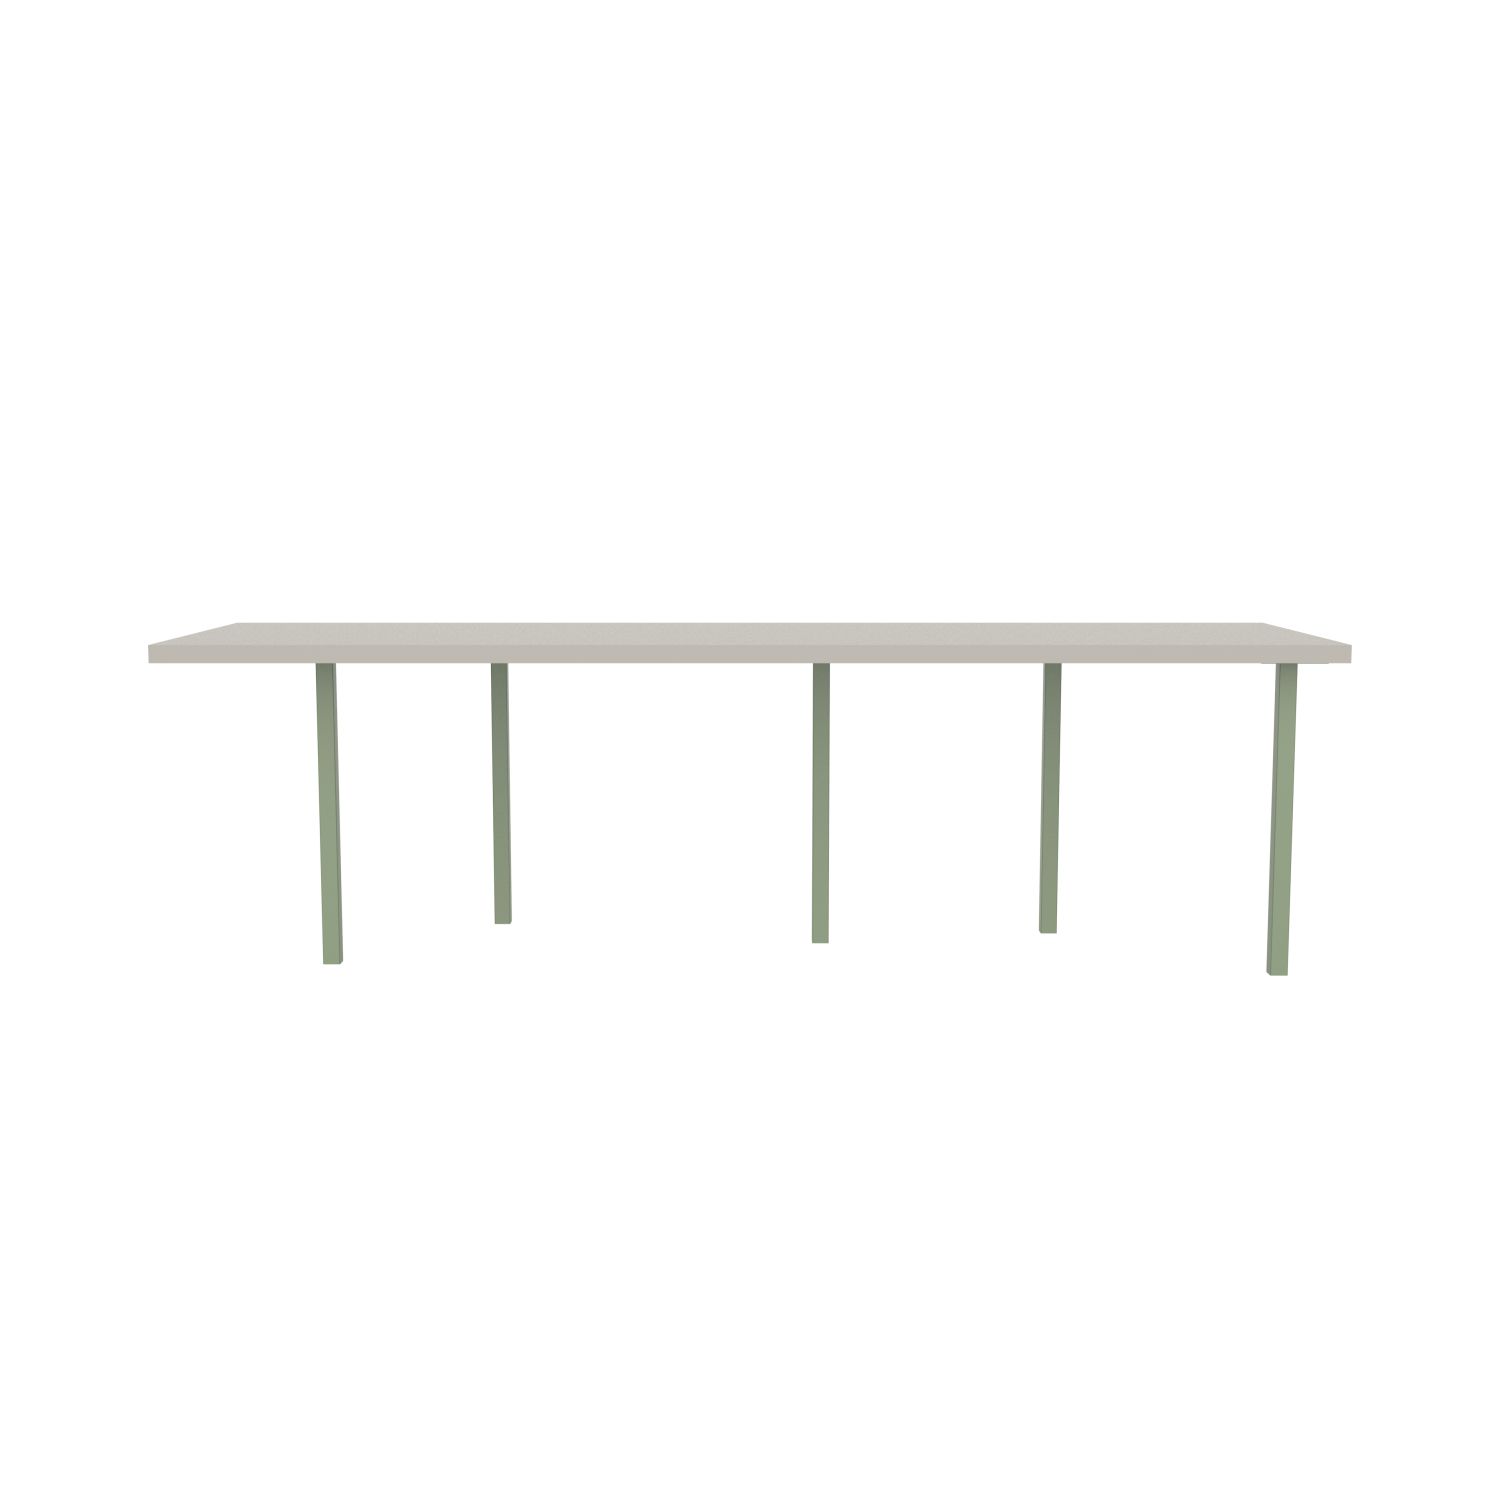 lensvelt bbrand table five fixed heigt 80x264 hpl white 50 mm price level 1 green ral6021